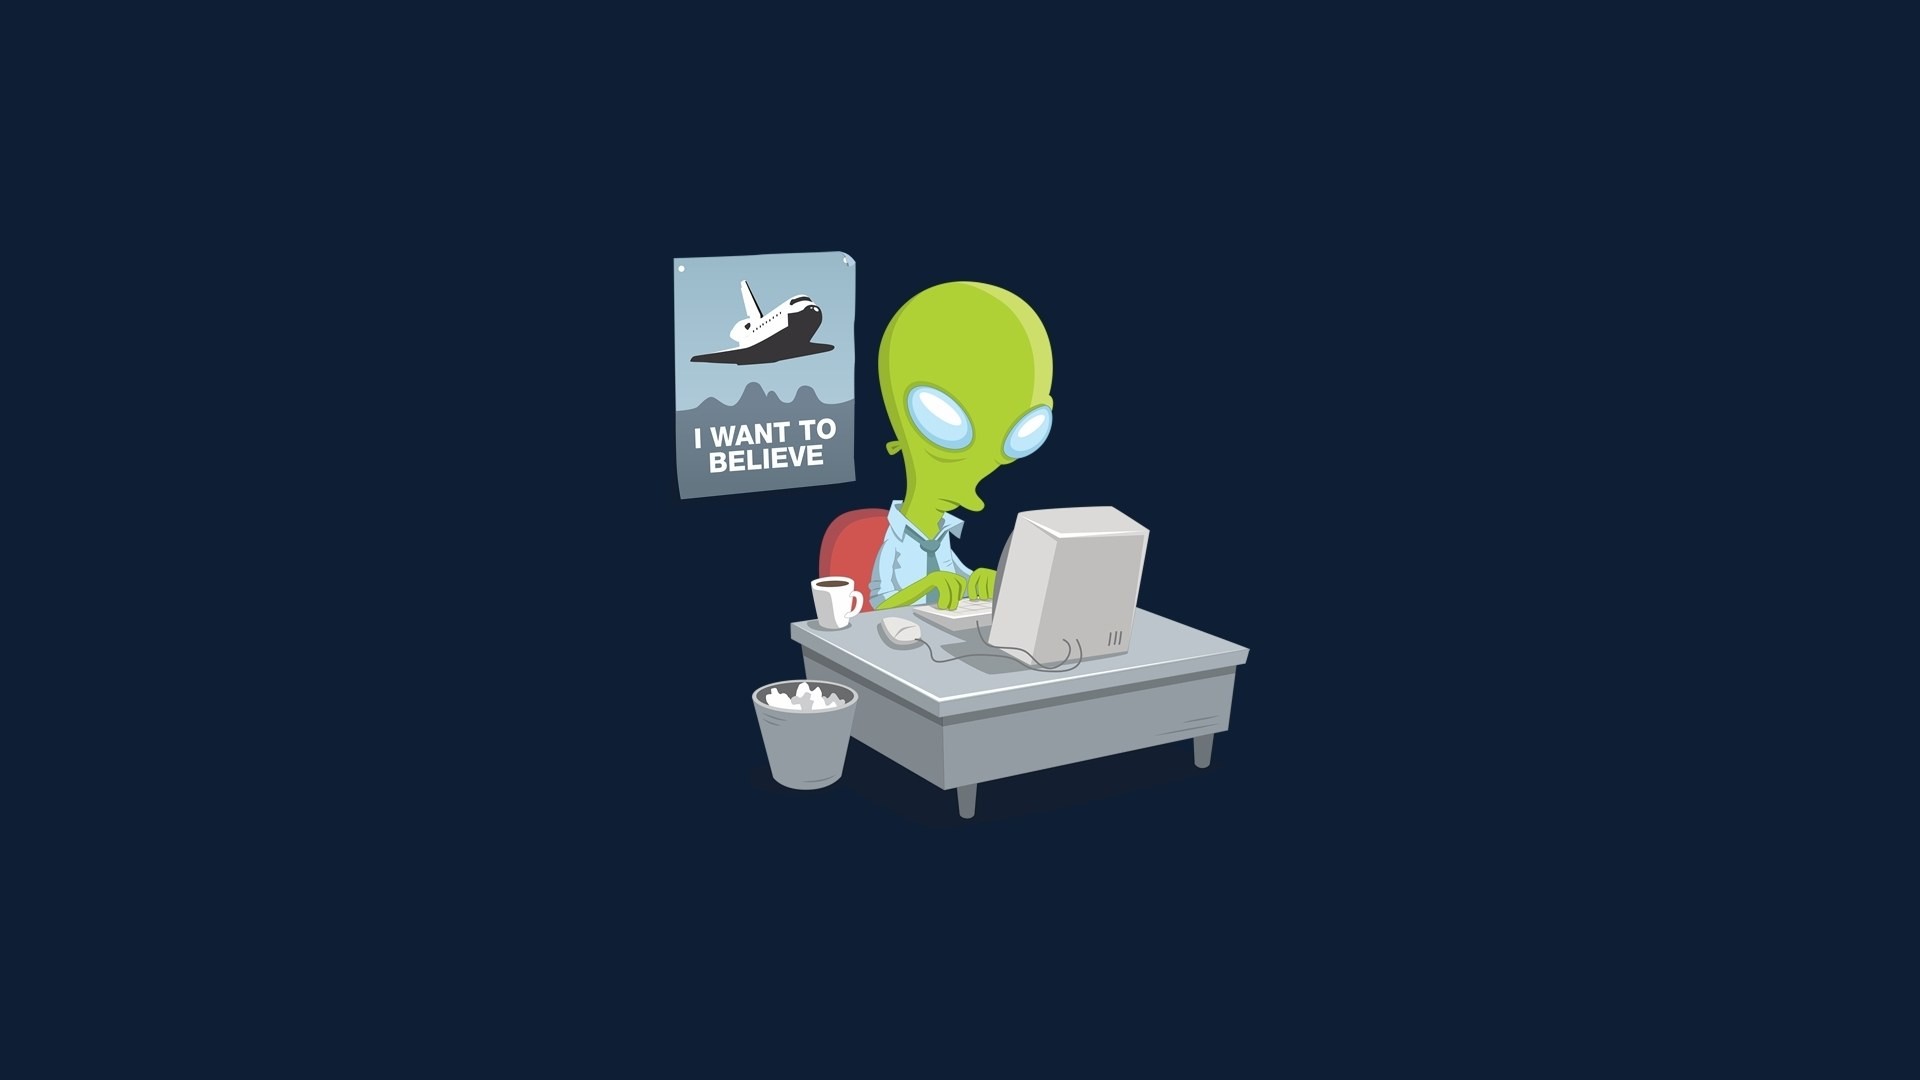 simple Background, Digital Art, Aliens, Computer, Table, Humor, The X Files, Trash, Alternate Reality, Cup, Minimalism, Blue Background Wallpaper